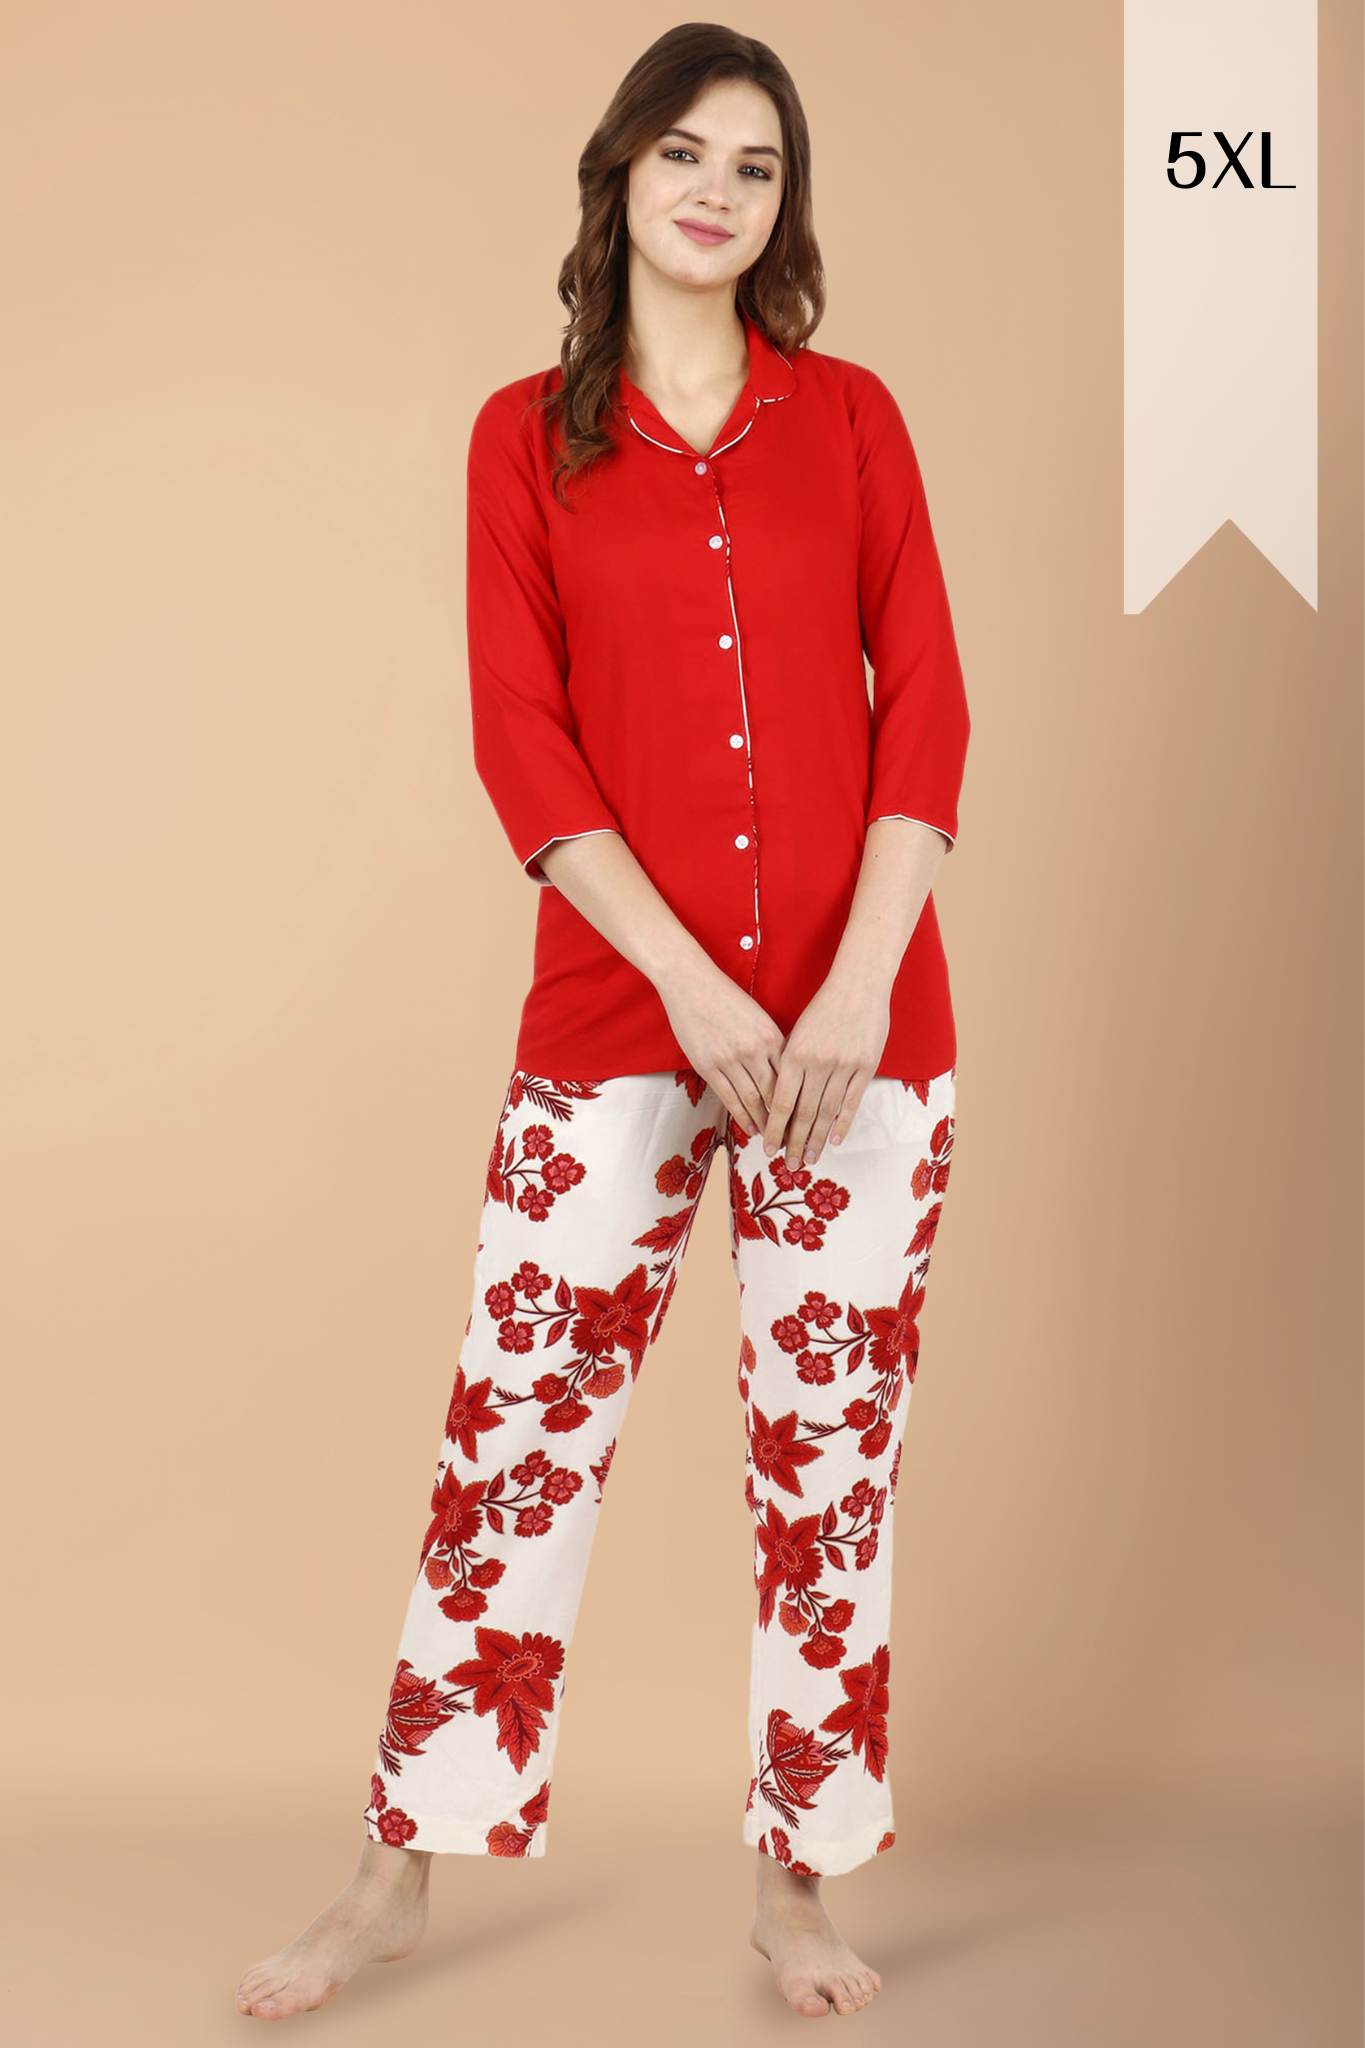 Cute Night Suits For Women 